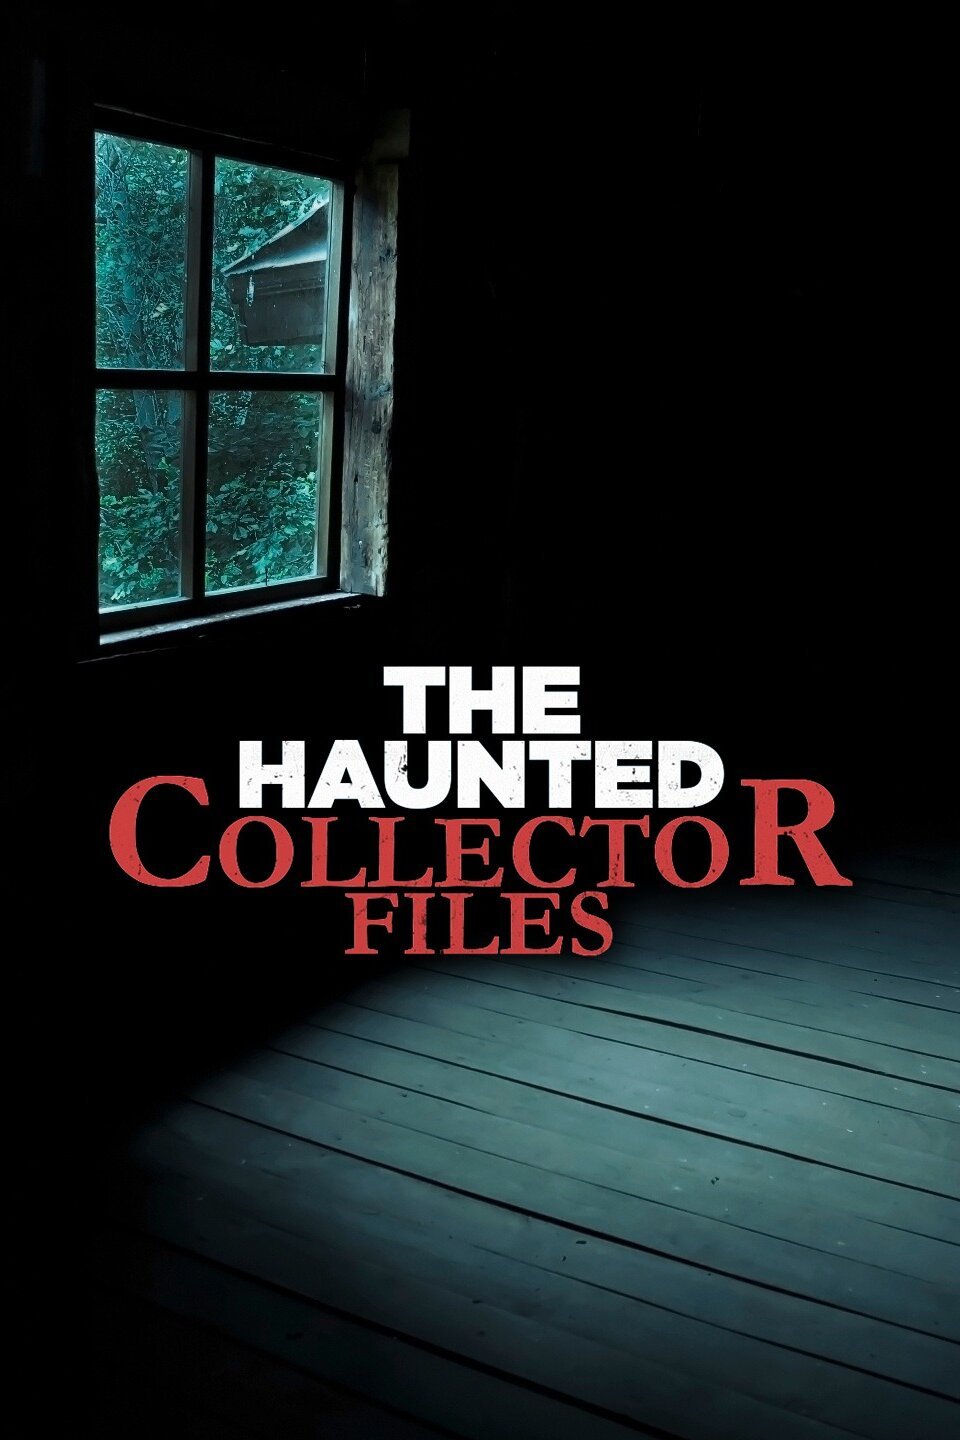 The haunted collector files